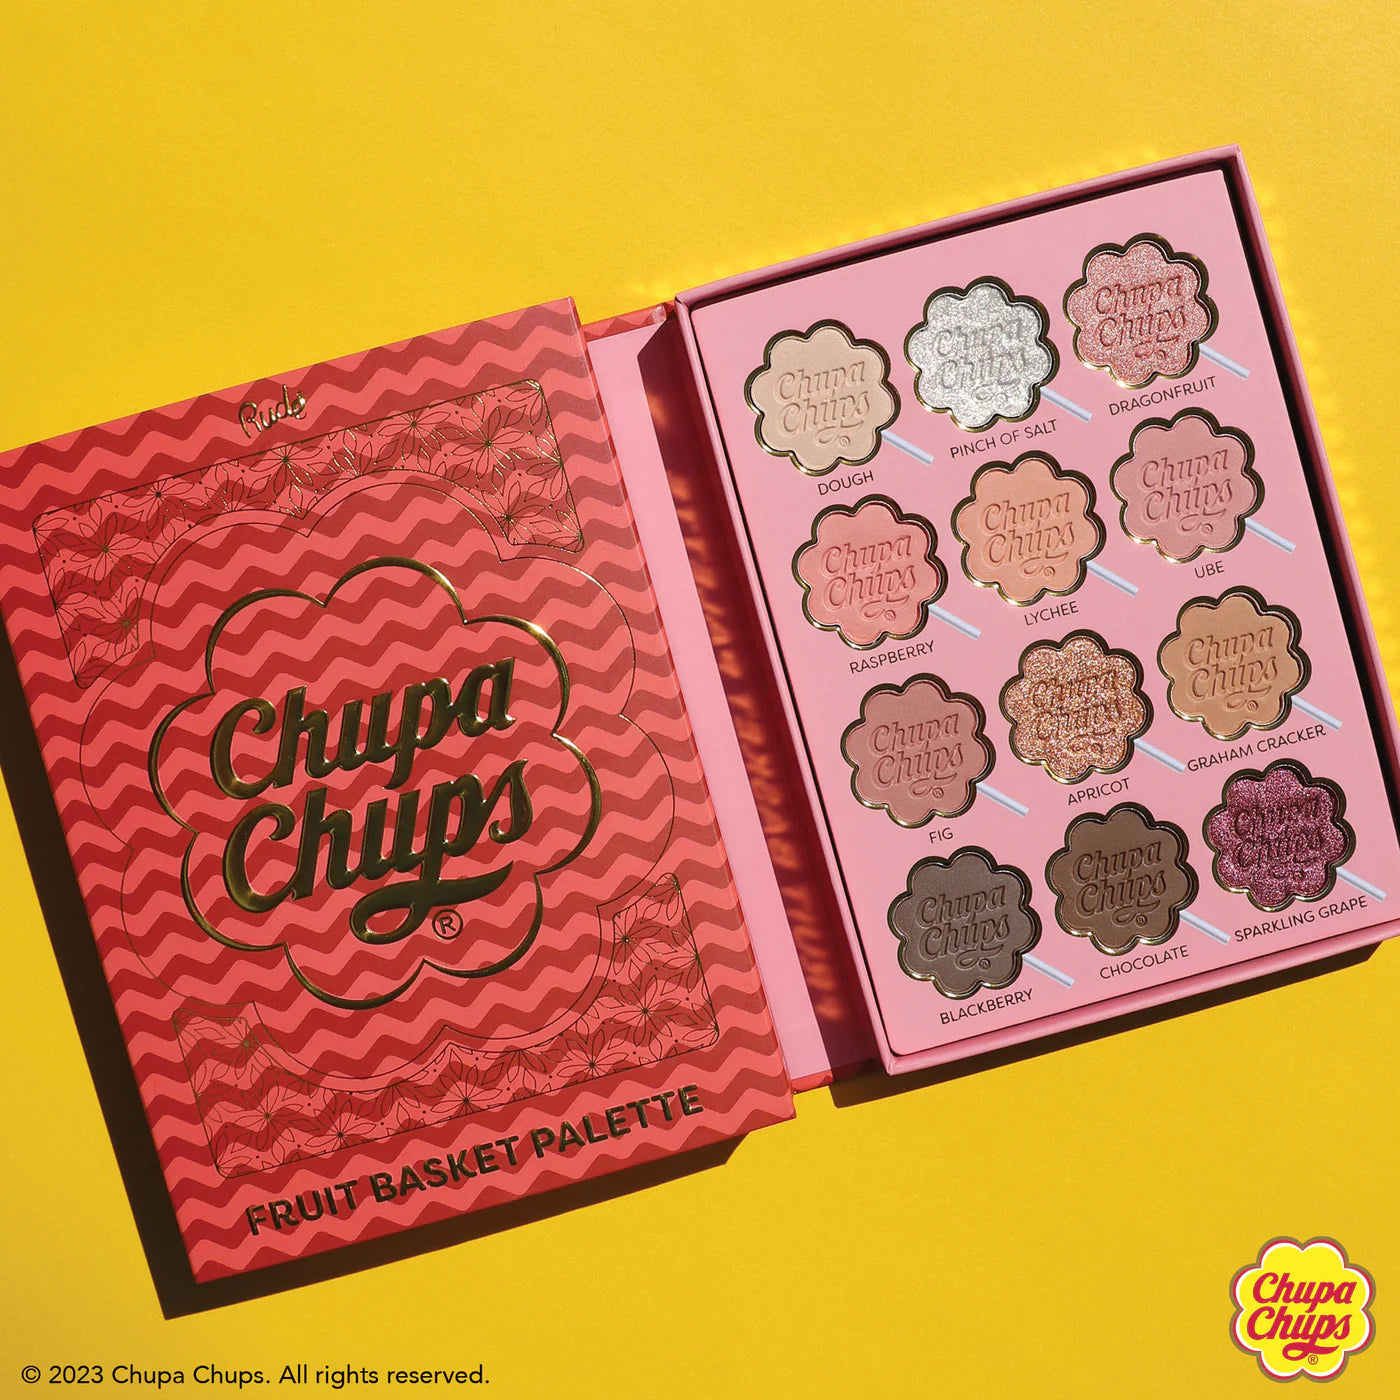 Shop Rude Cosmetics Chupa Chups Fruit Basket 12 Colour Palette - Premium Eyeshadow from Rude Cosmetics Online now at Spoiled Brat 